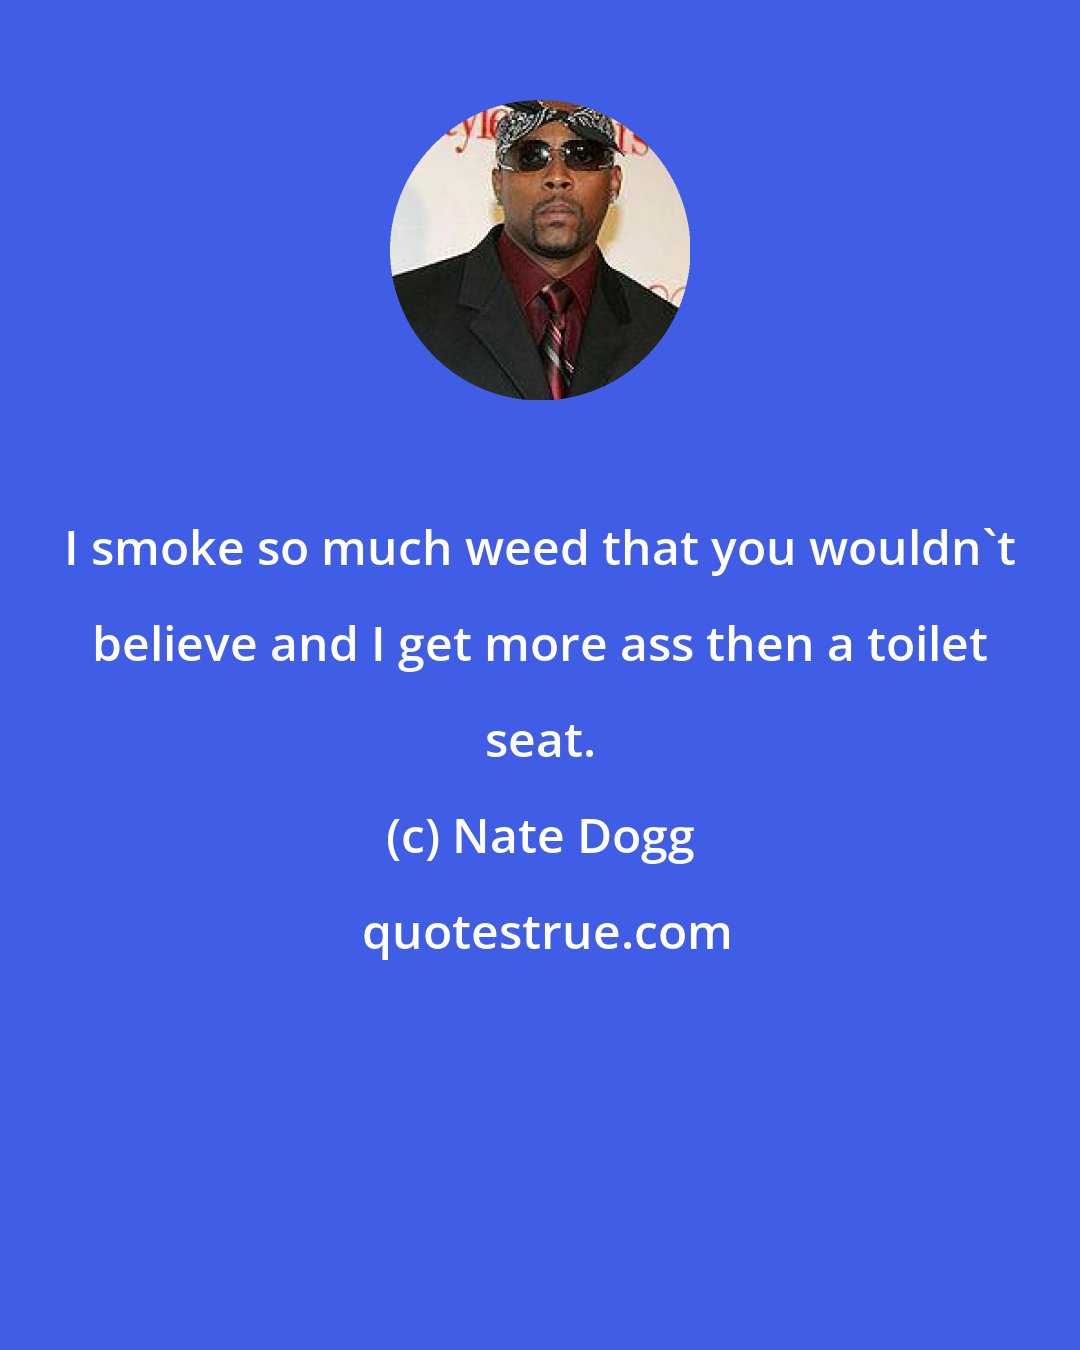 Nate Dogg: I smoke so much weed that you wouldn't believe and I get more ass then a toilet seat.